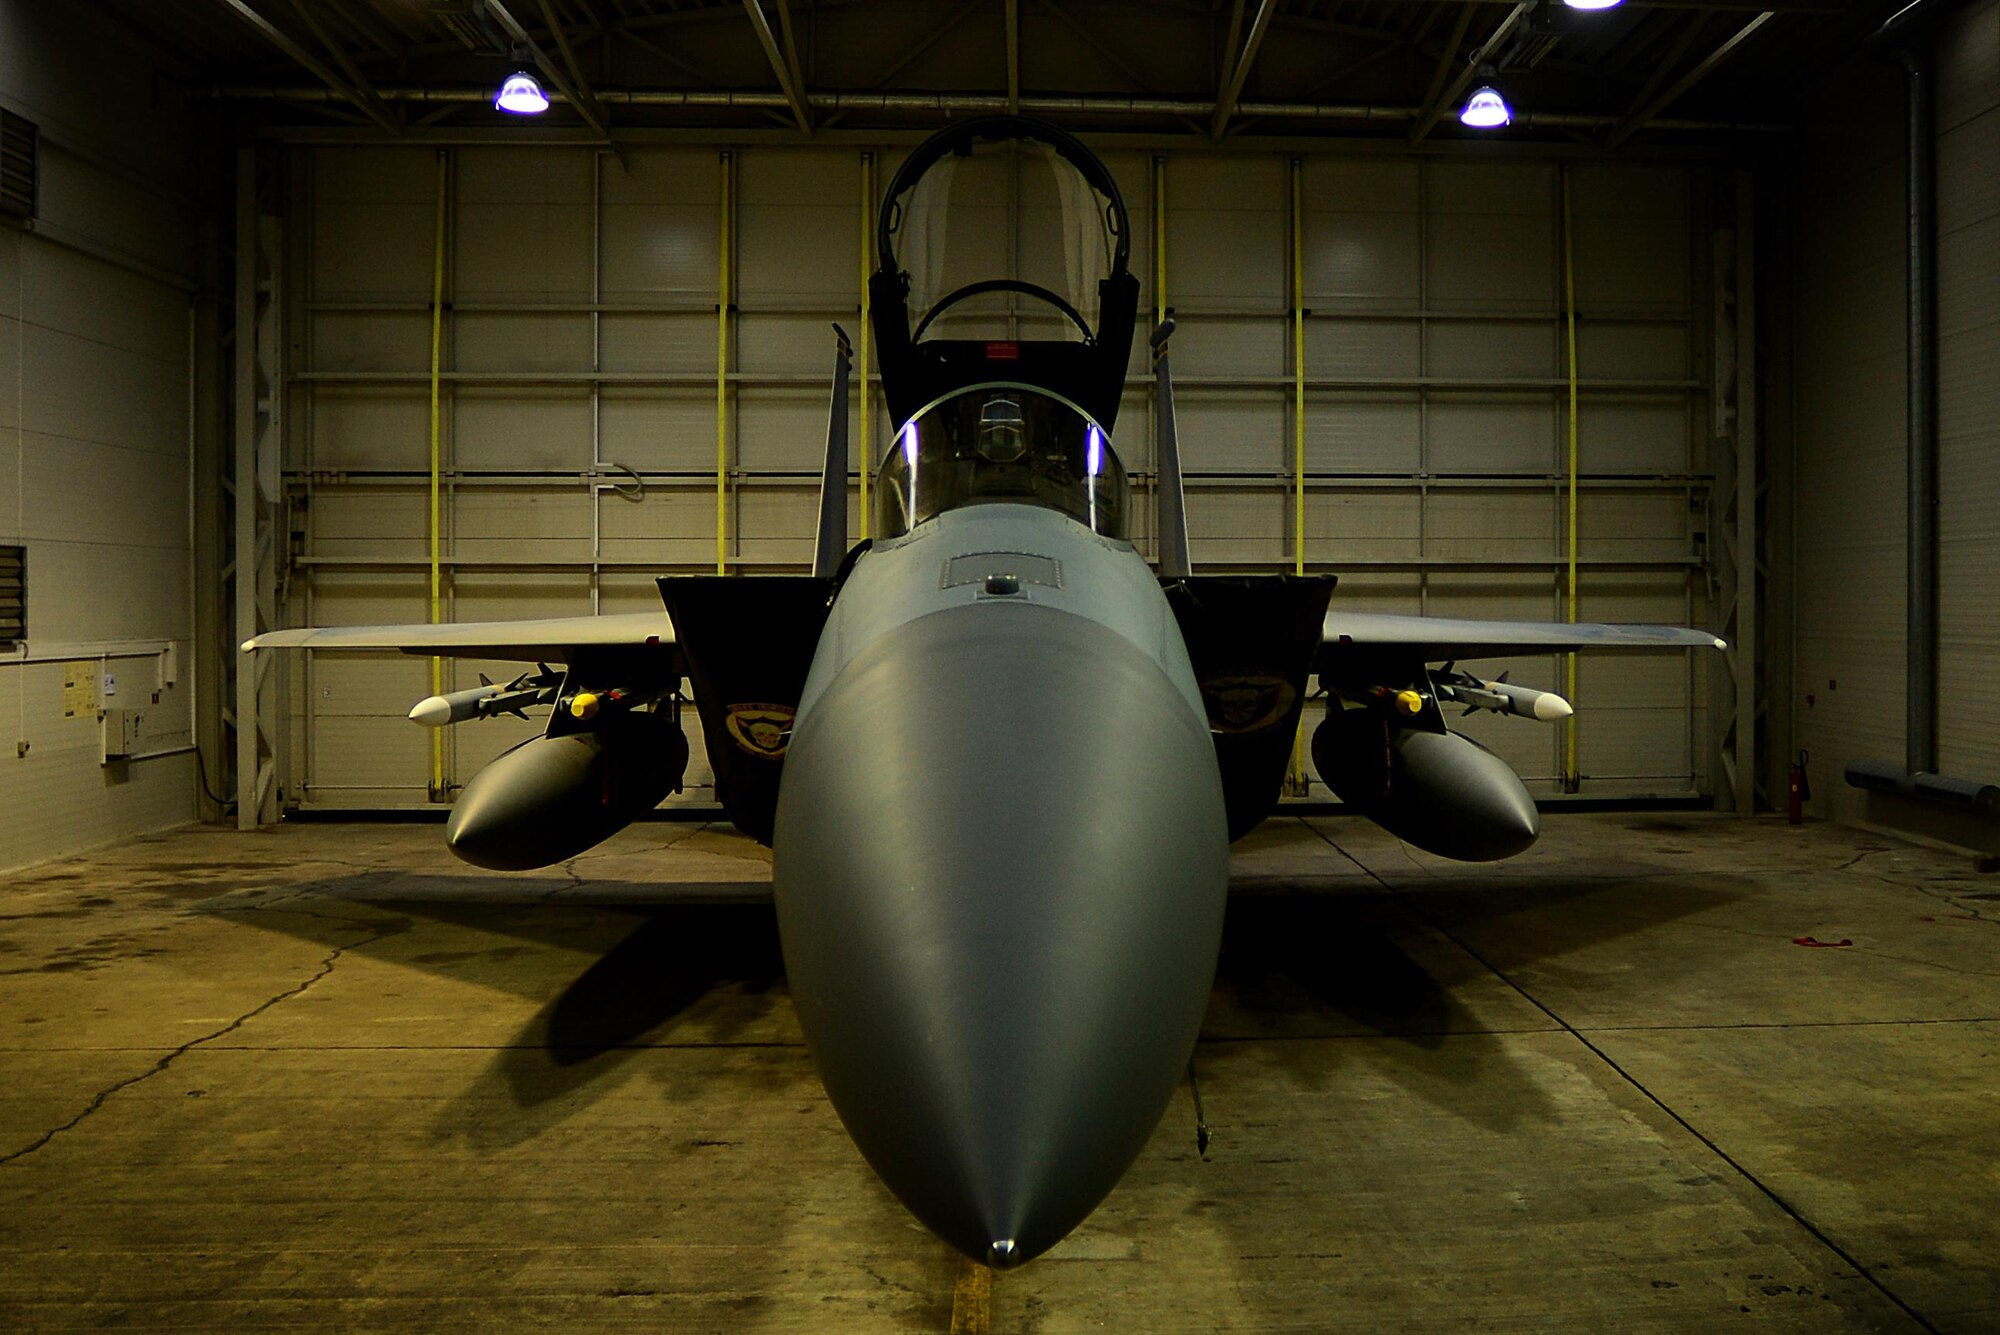 A U.S. Air Force F-15C Eagle configured as a quick reaction aircraft remains ready to execute Baltic Air Policing operations at Siauliai Air Base, Lithuania, Sept. 4, 2017. The Eagle is a combat proven, tactical fighter that can penetrate rival defenses and outperform and outfight any current opposing aircraft, giving NATO the strategic access critical to meet Article 5 commitments and to respond to threats against its allies and partners. (U.S. Air Force photo/ Tech. Sgt. Matthew Plew)